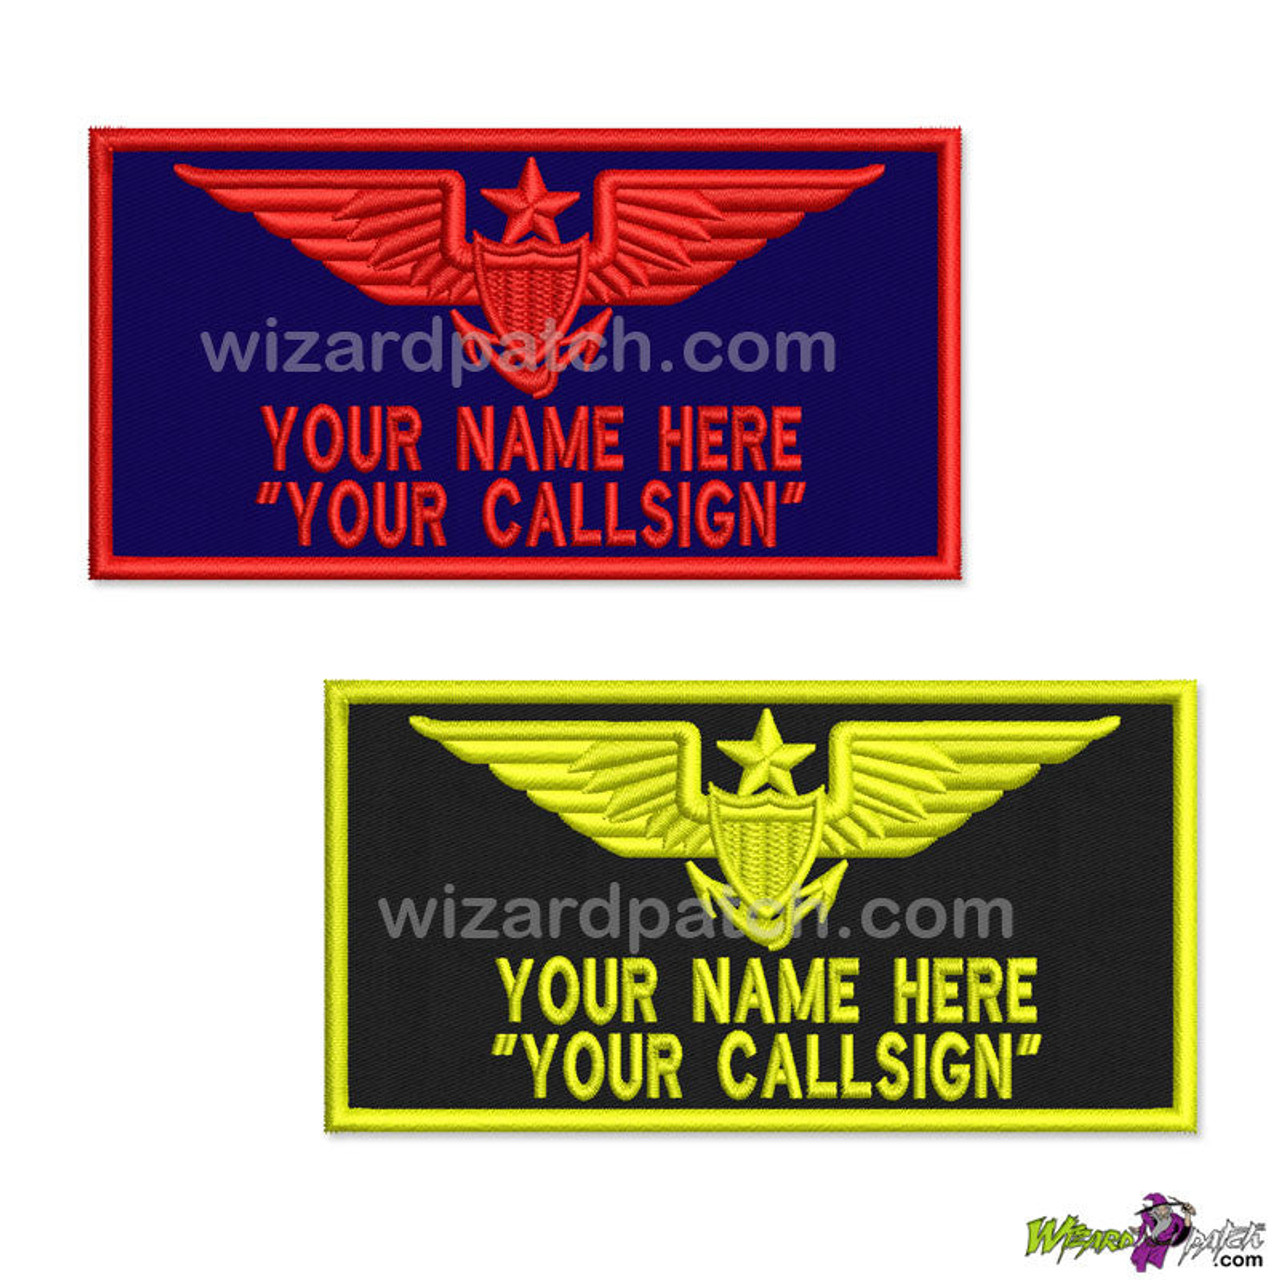 Embroidered badges & patches  custom embroidered badges - Your